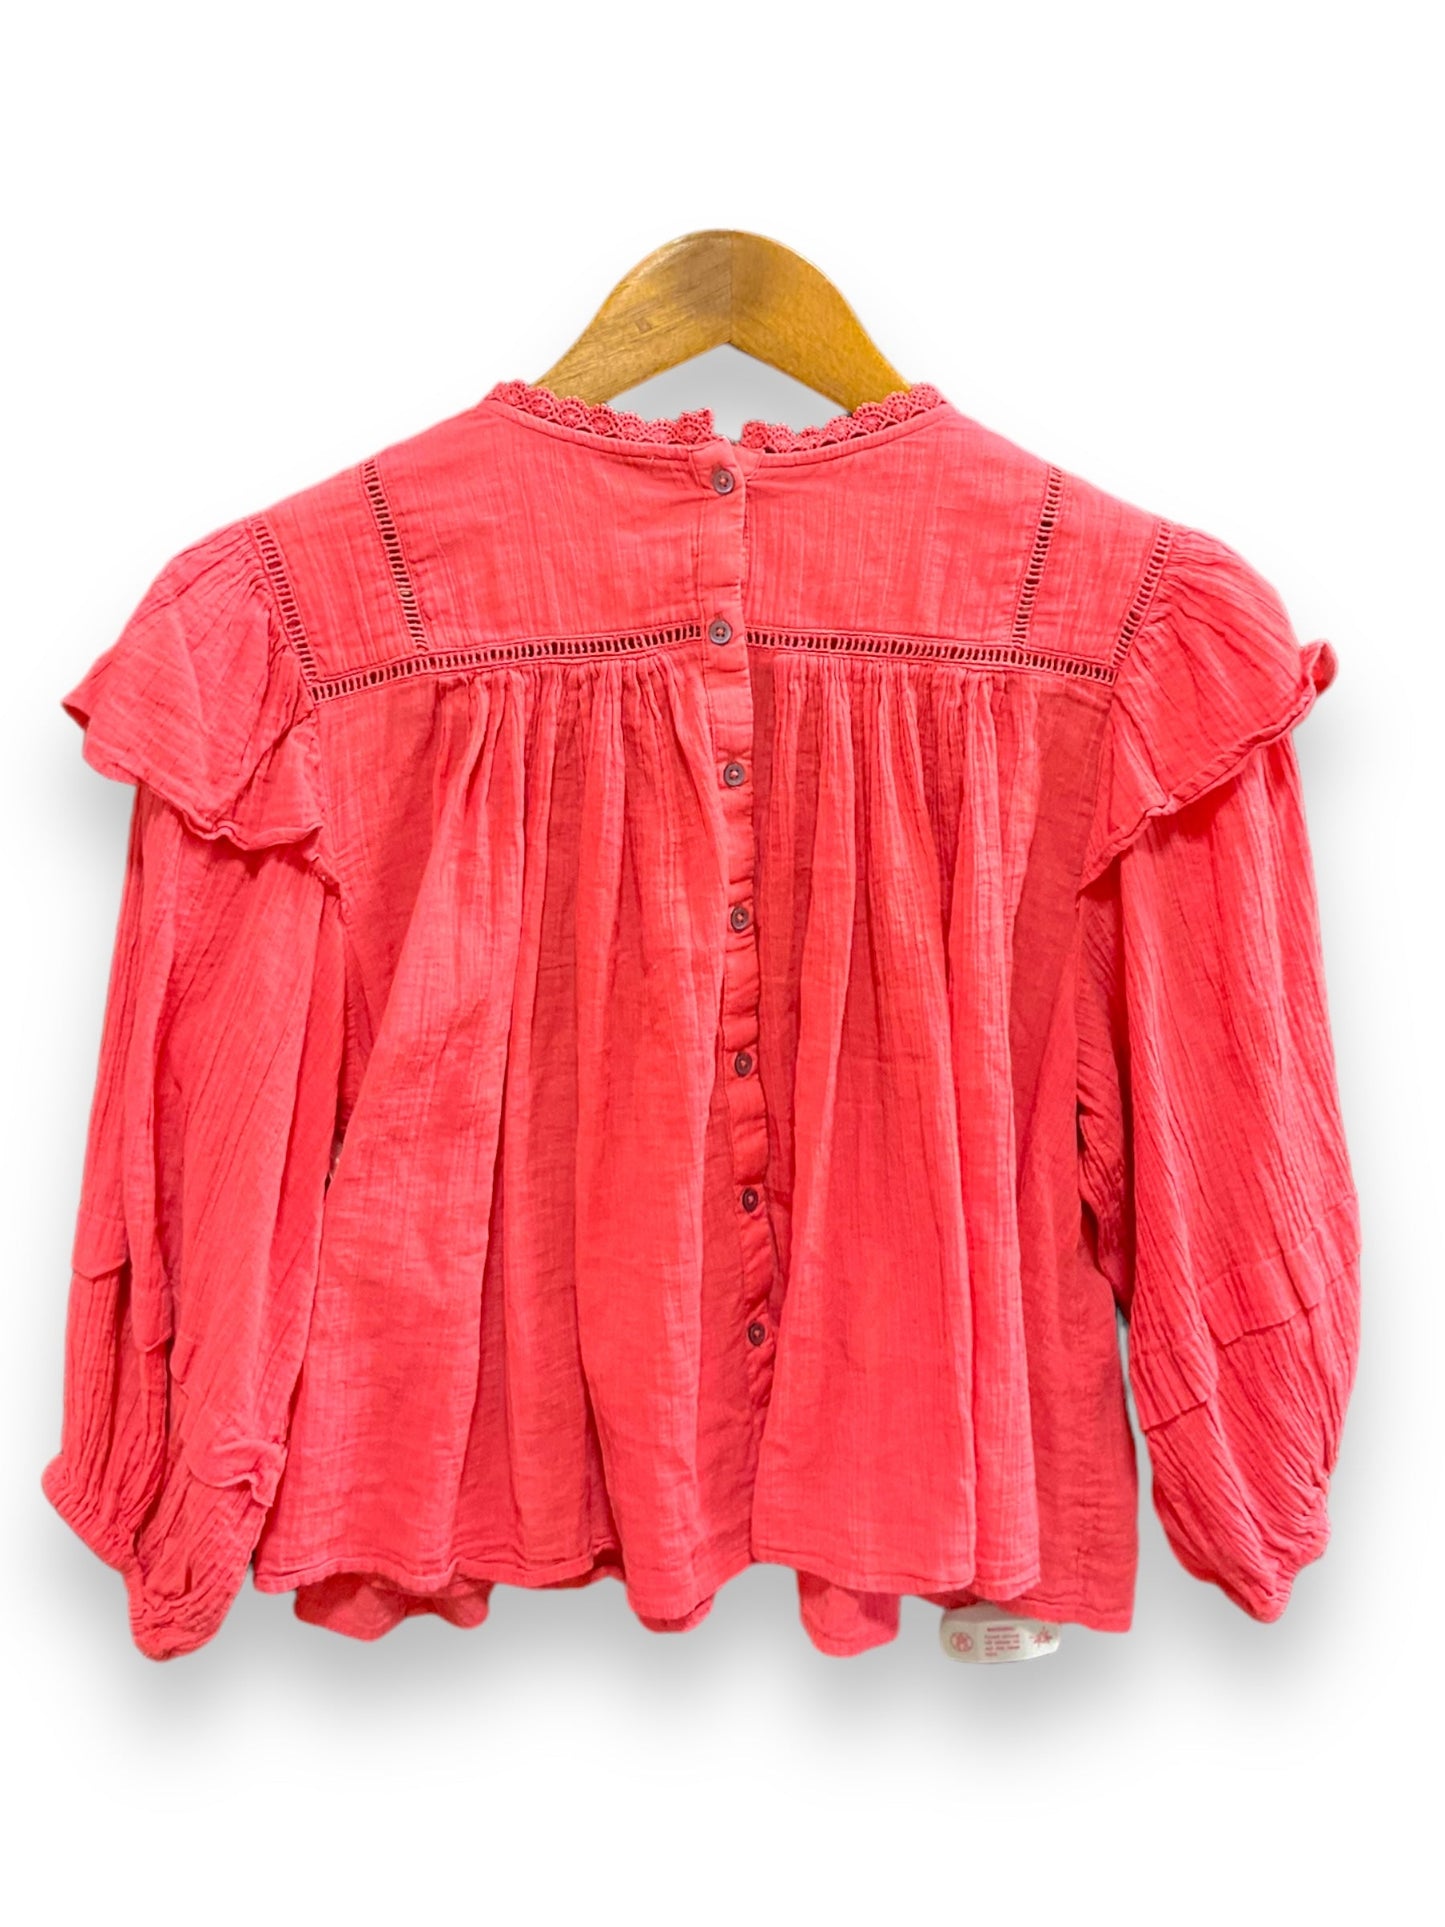 Coral Top 3/4 Sleeve Free People, Size Xs